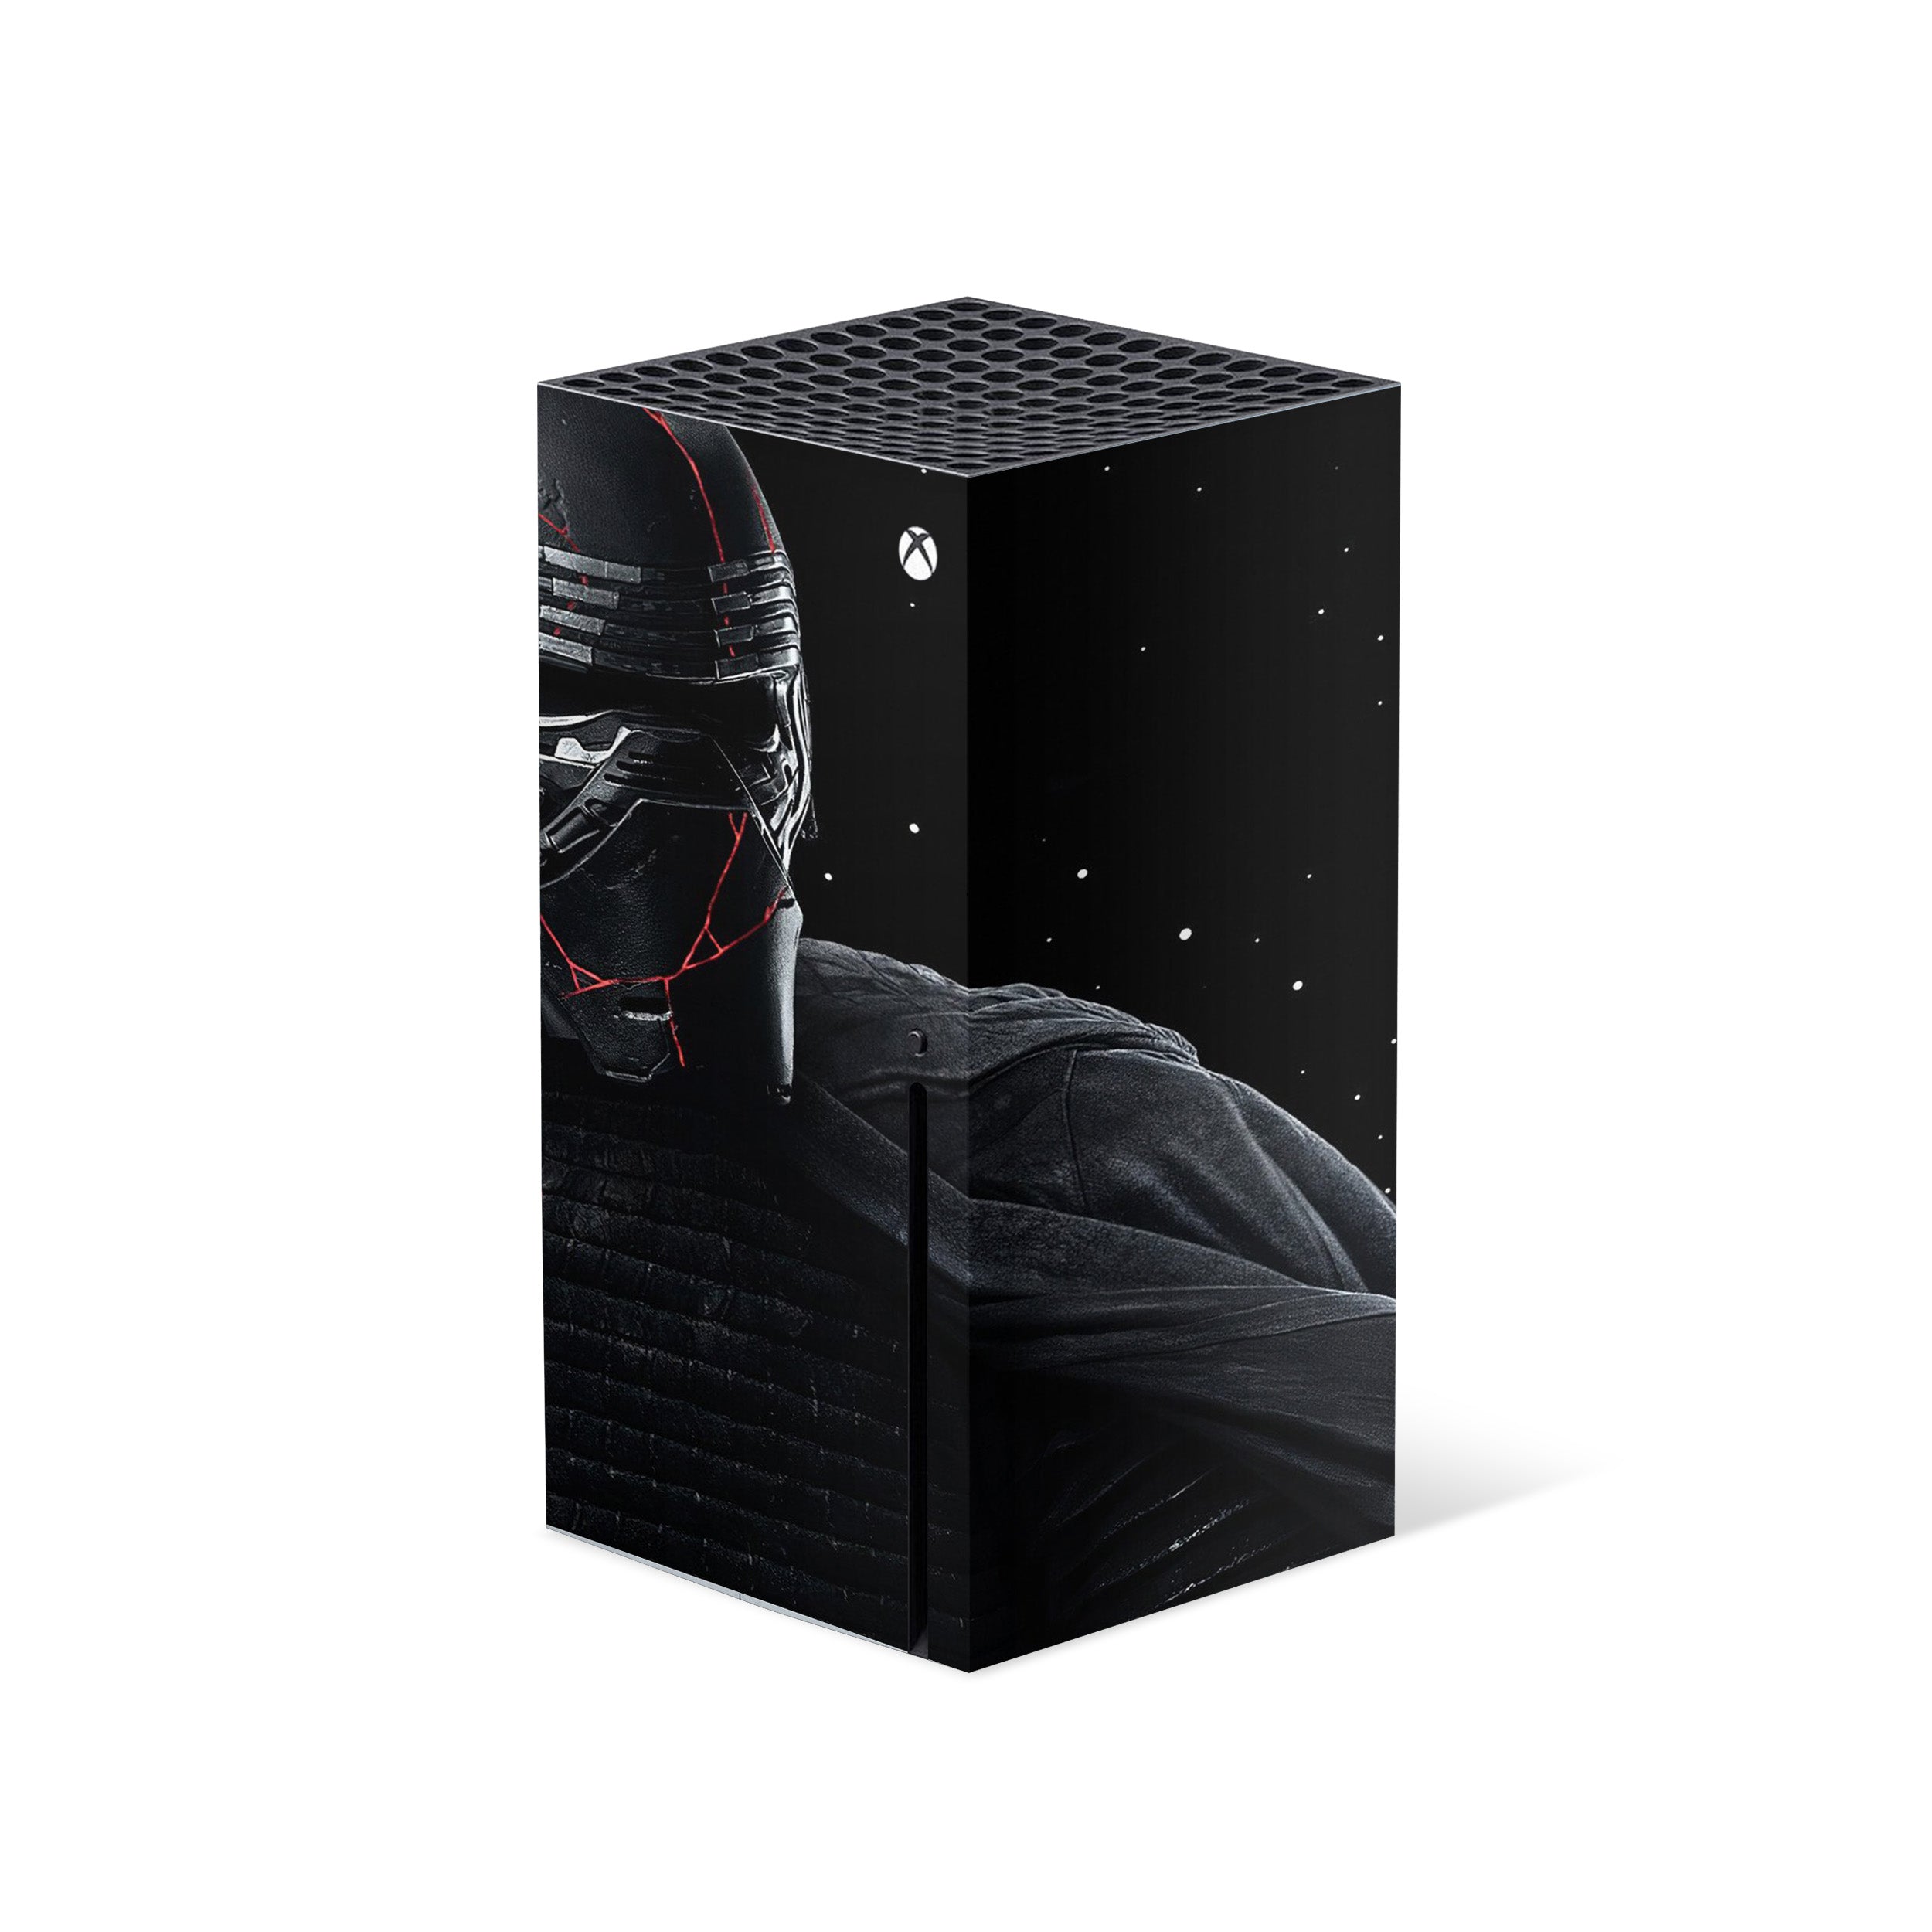 A video game skin featuring a Star Wars design for the Xbox Series X.